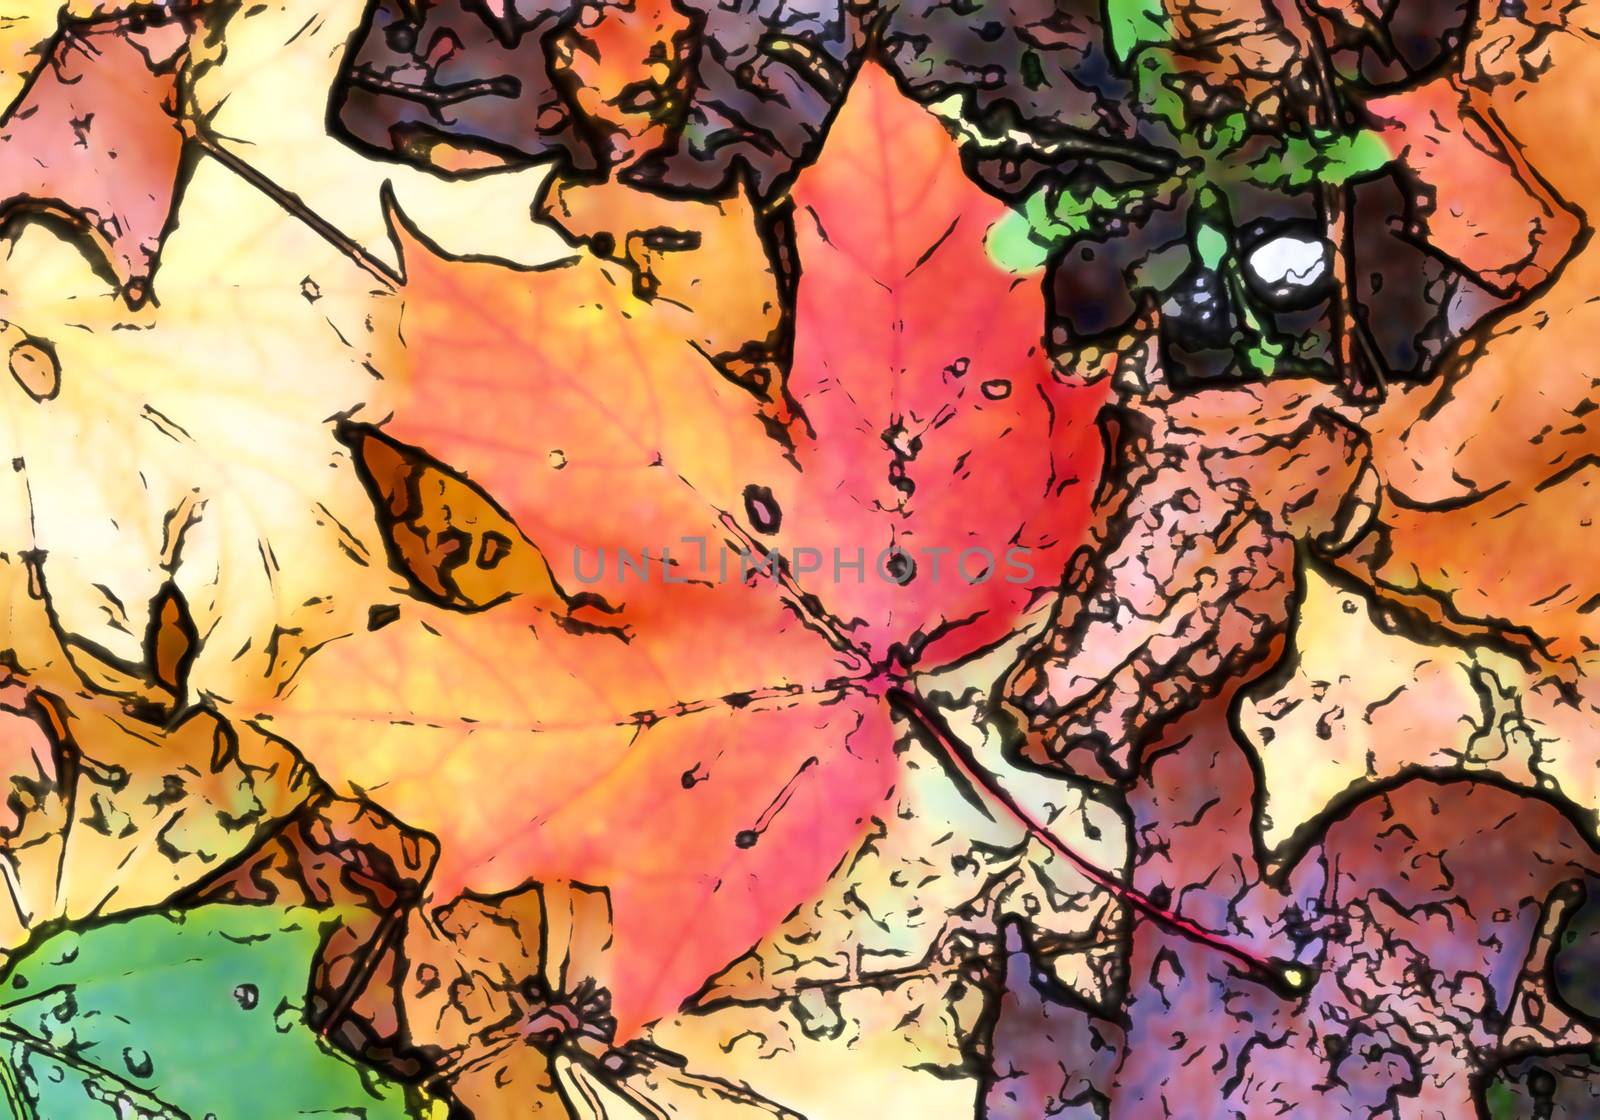 Comic style painting of colorful autumn leaves for backgrounds or textures